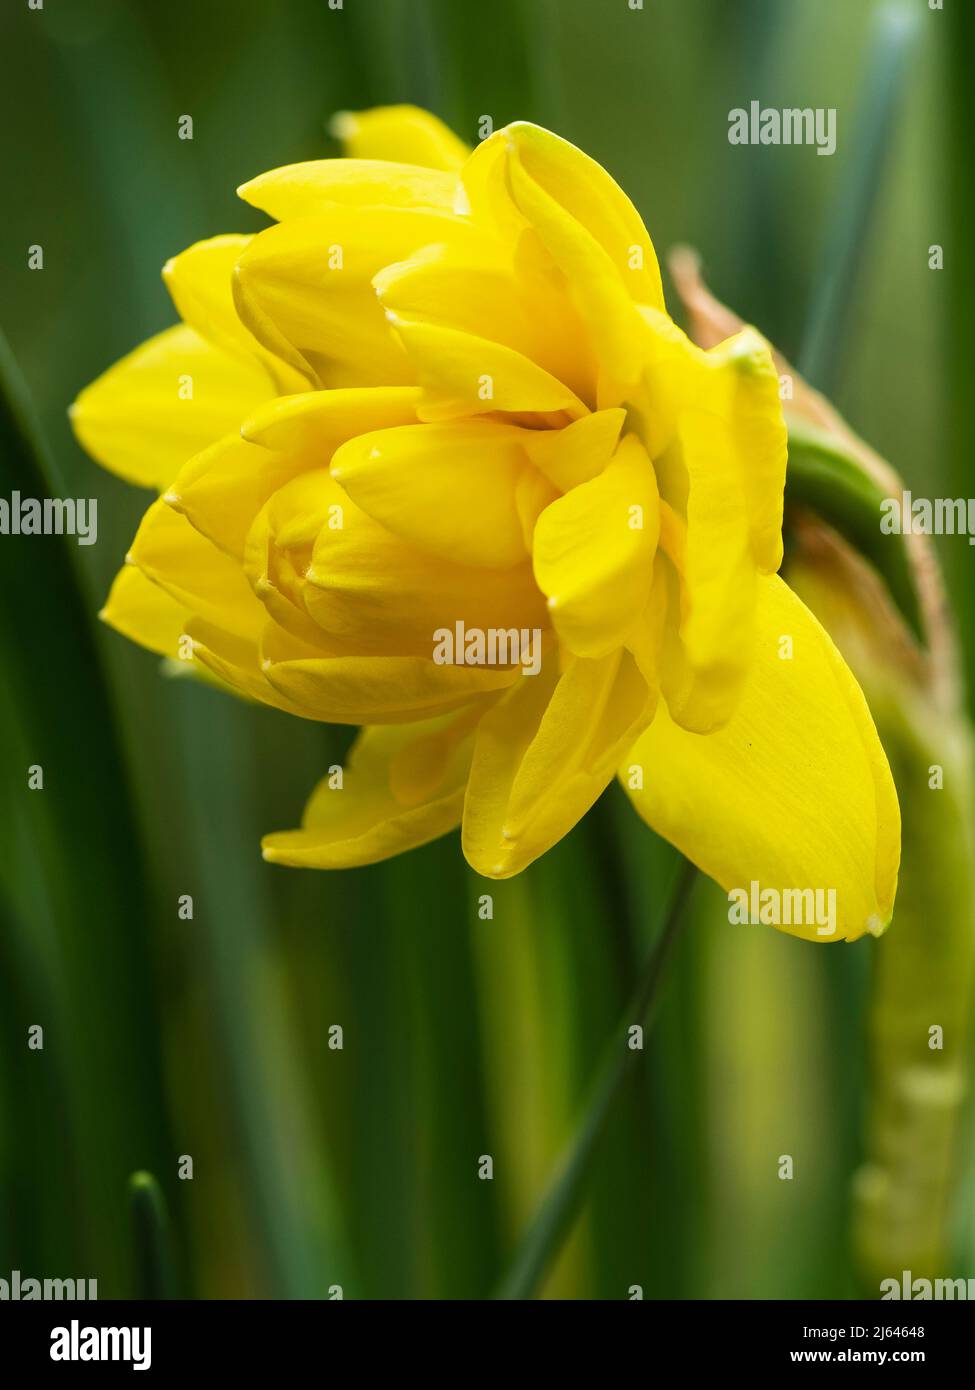 Double yellow flower of the small statured Queen Anne's heirloom daffodil, Narcissus 'Pencrebar' Stock Photo